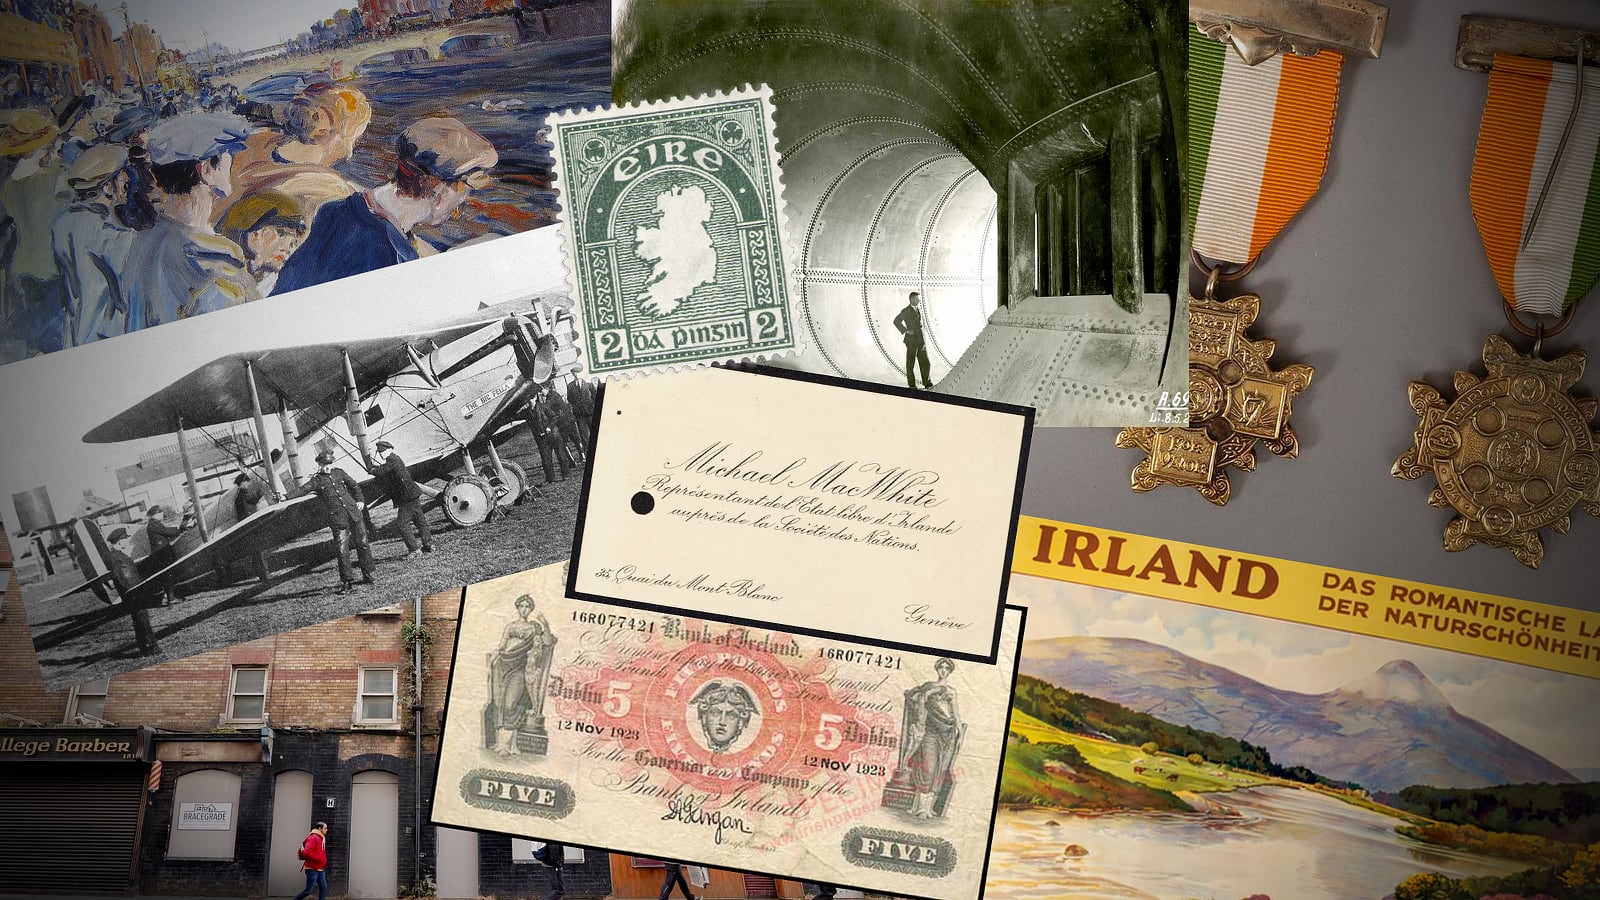 1923 in 23 objects: Turbines, petrol pumps, the first Irish stamp, a customs border and WB Yeats’s Nobel medal.